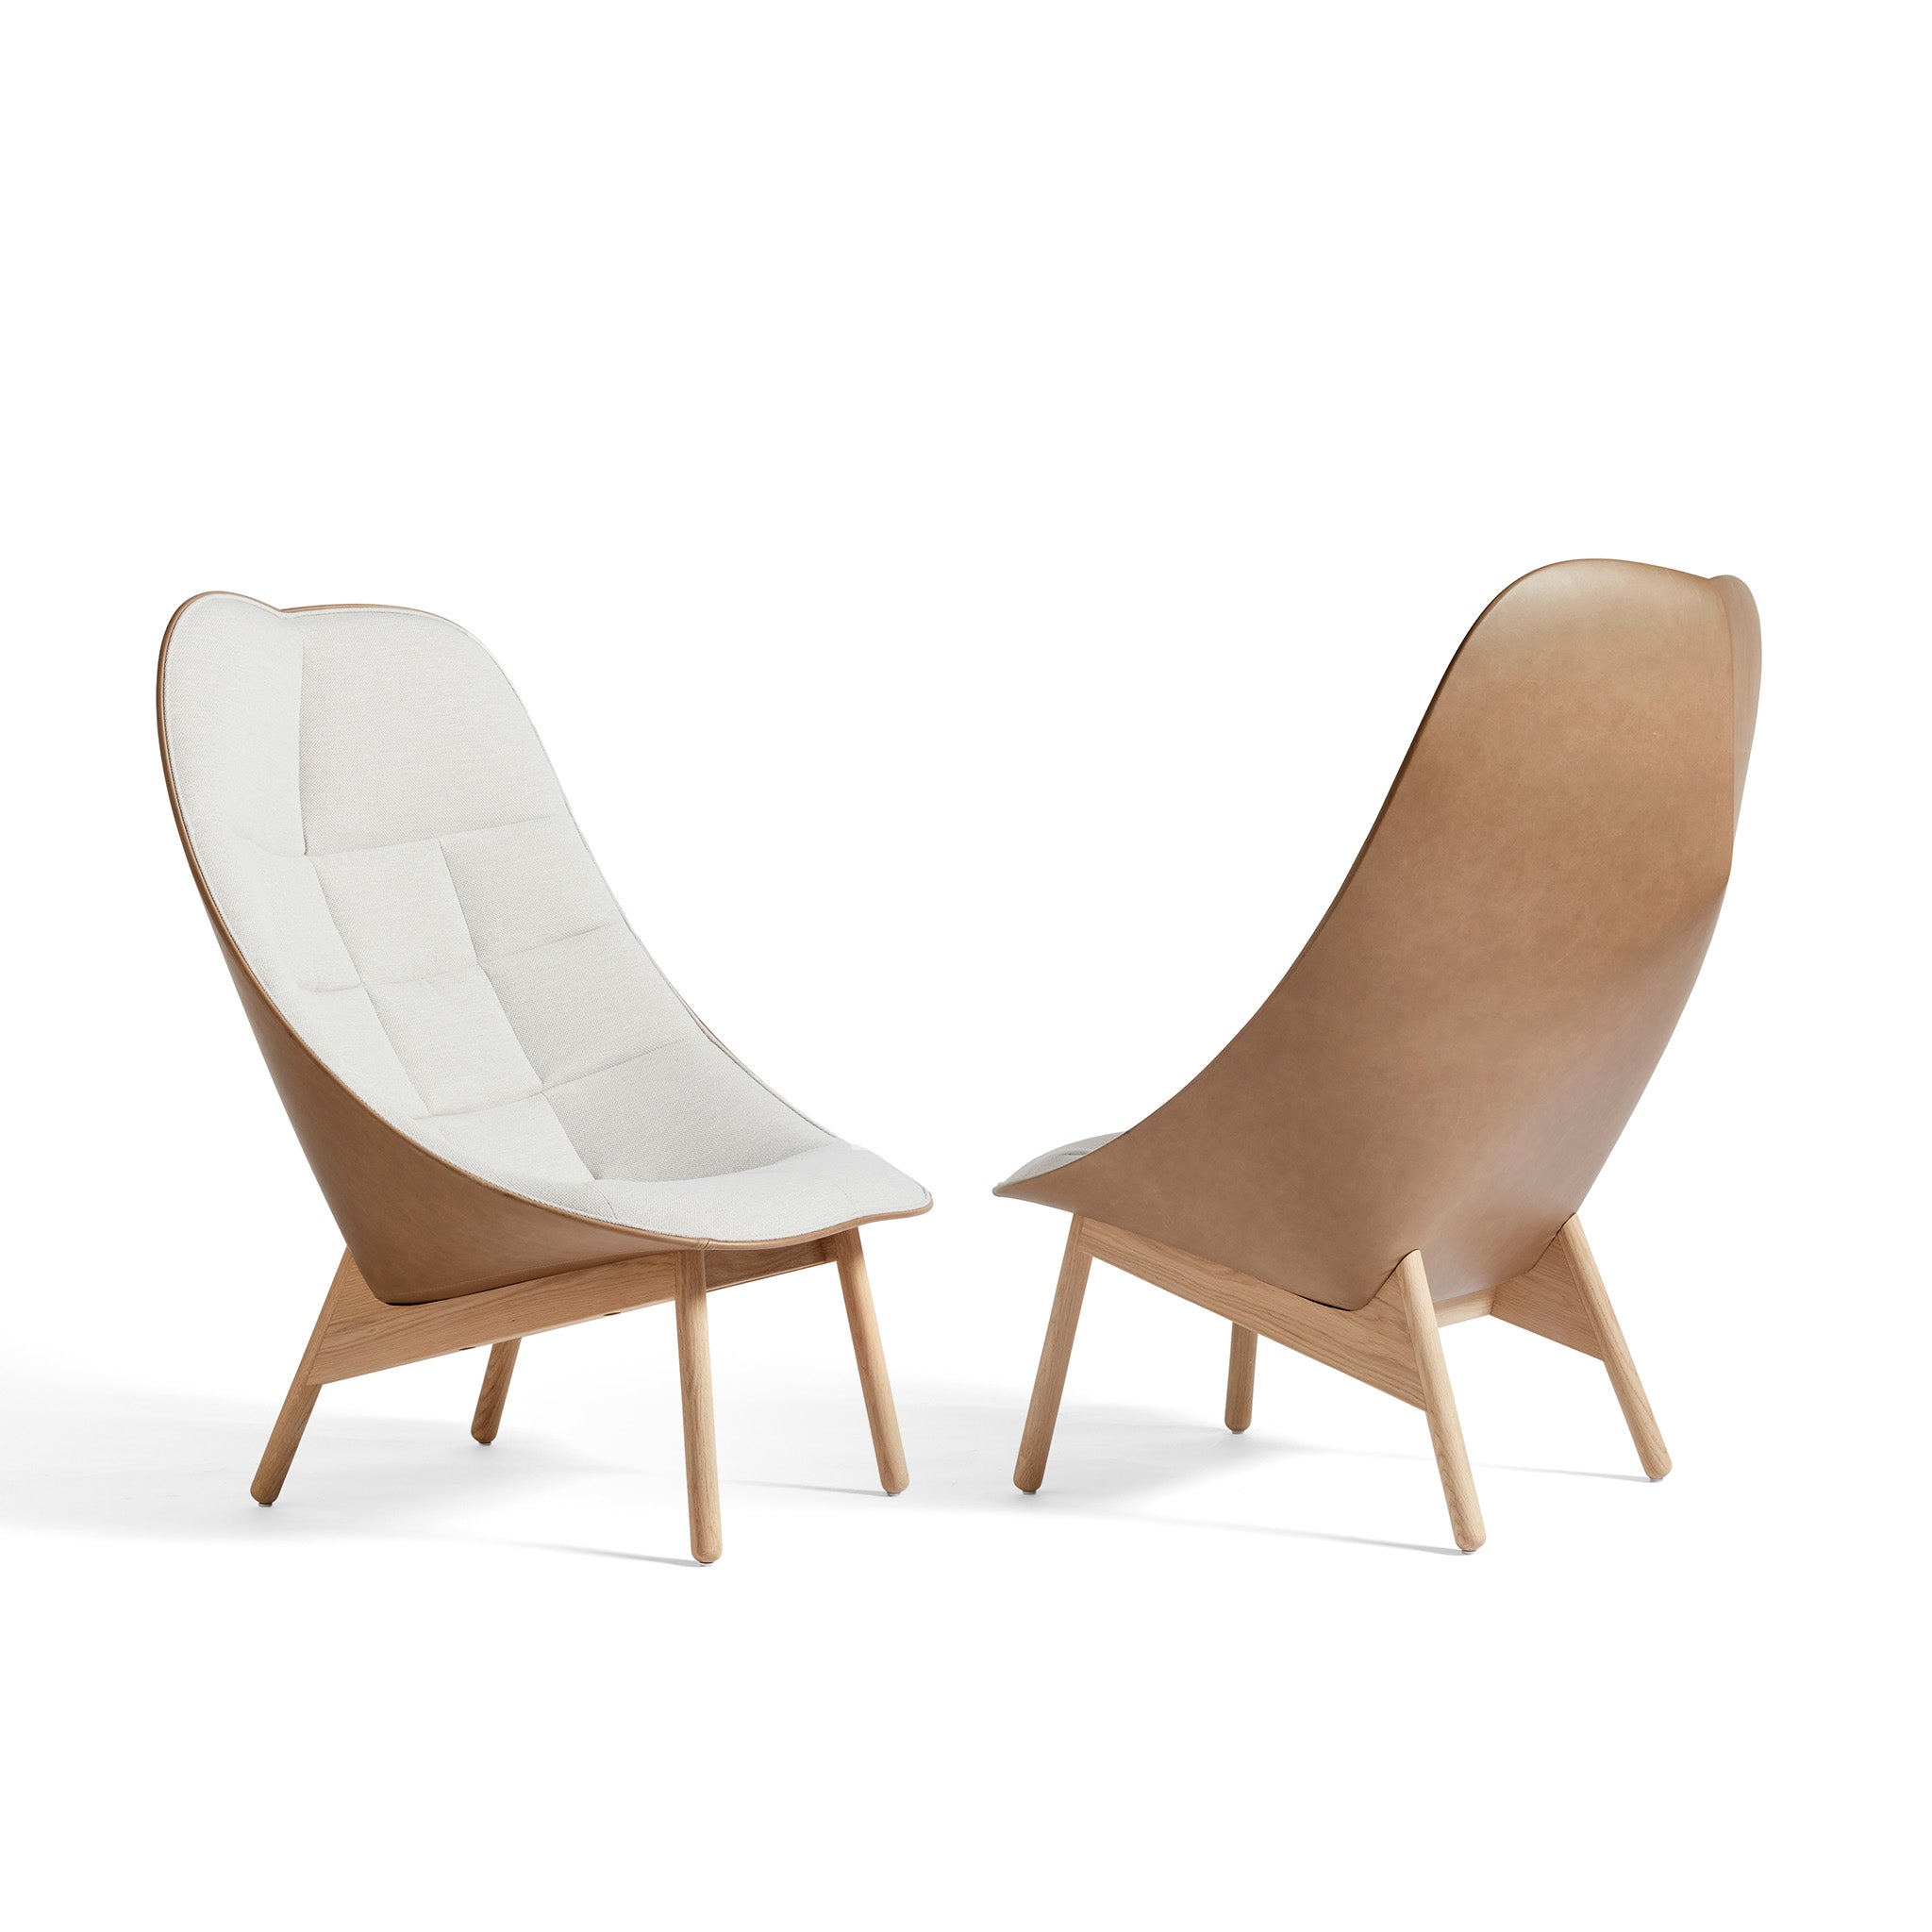 Uchiwa Quilted Chair  by Doshi Levien